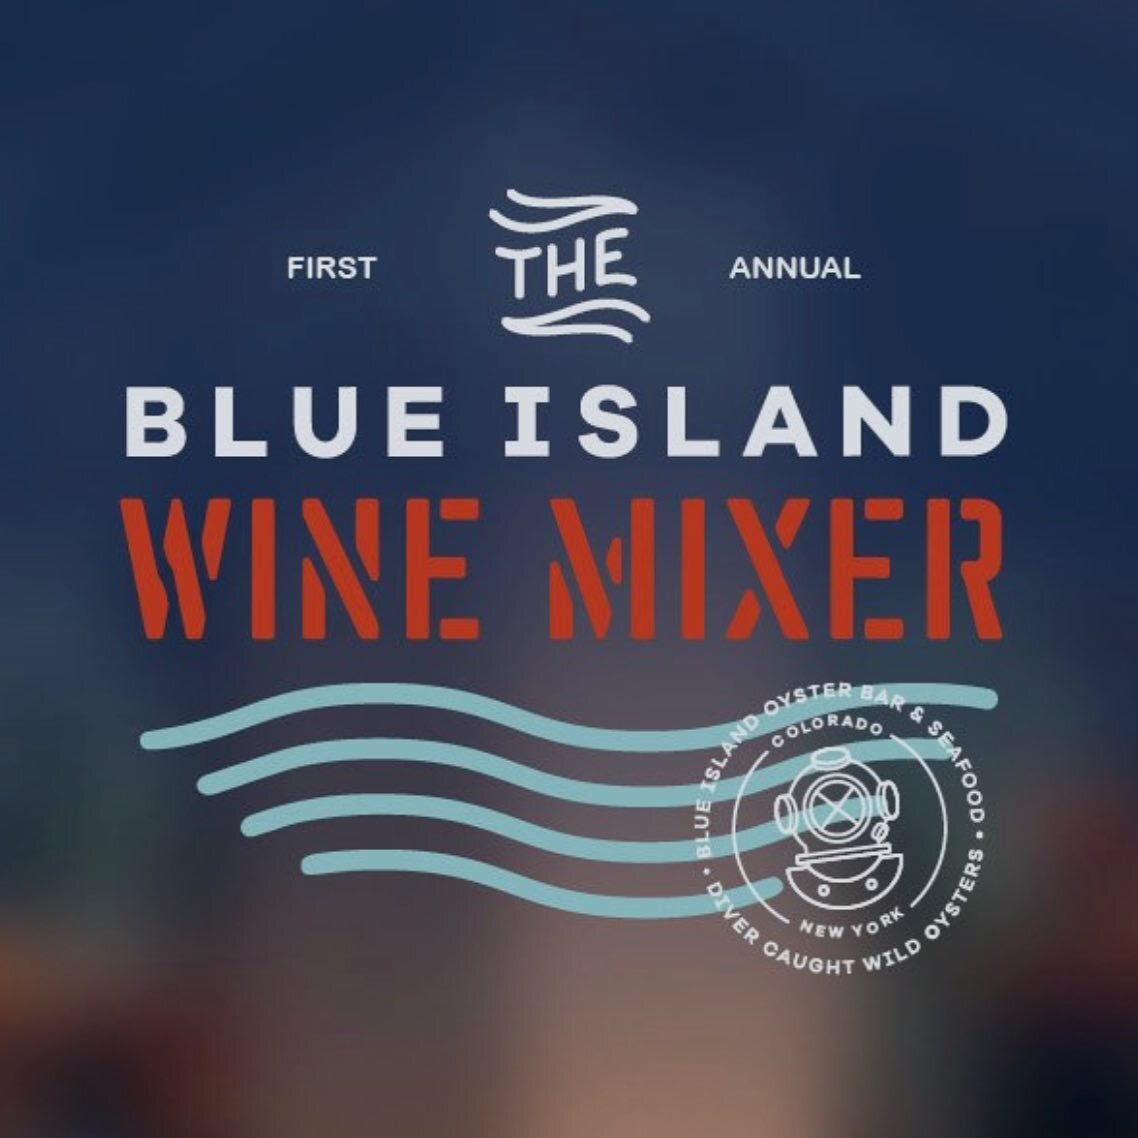 Tickets are on presale now for the first annual Blue Island Wine Mixer! Join us July 25 for an evening of wine tasting and judging. 

Your ticket includes: over 20 wines to sample, bottomless oyster bar, passed hors d&rsquo;Oeuvres &amp; sushi rolls,